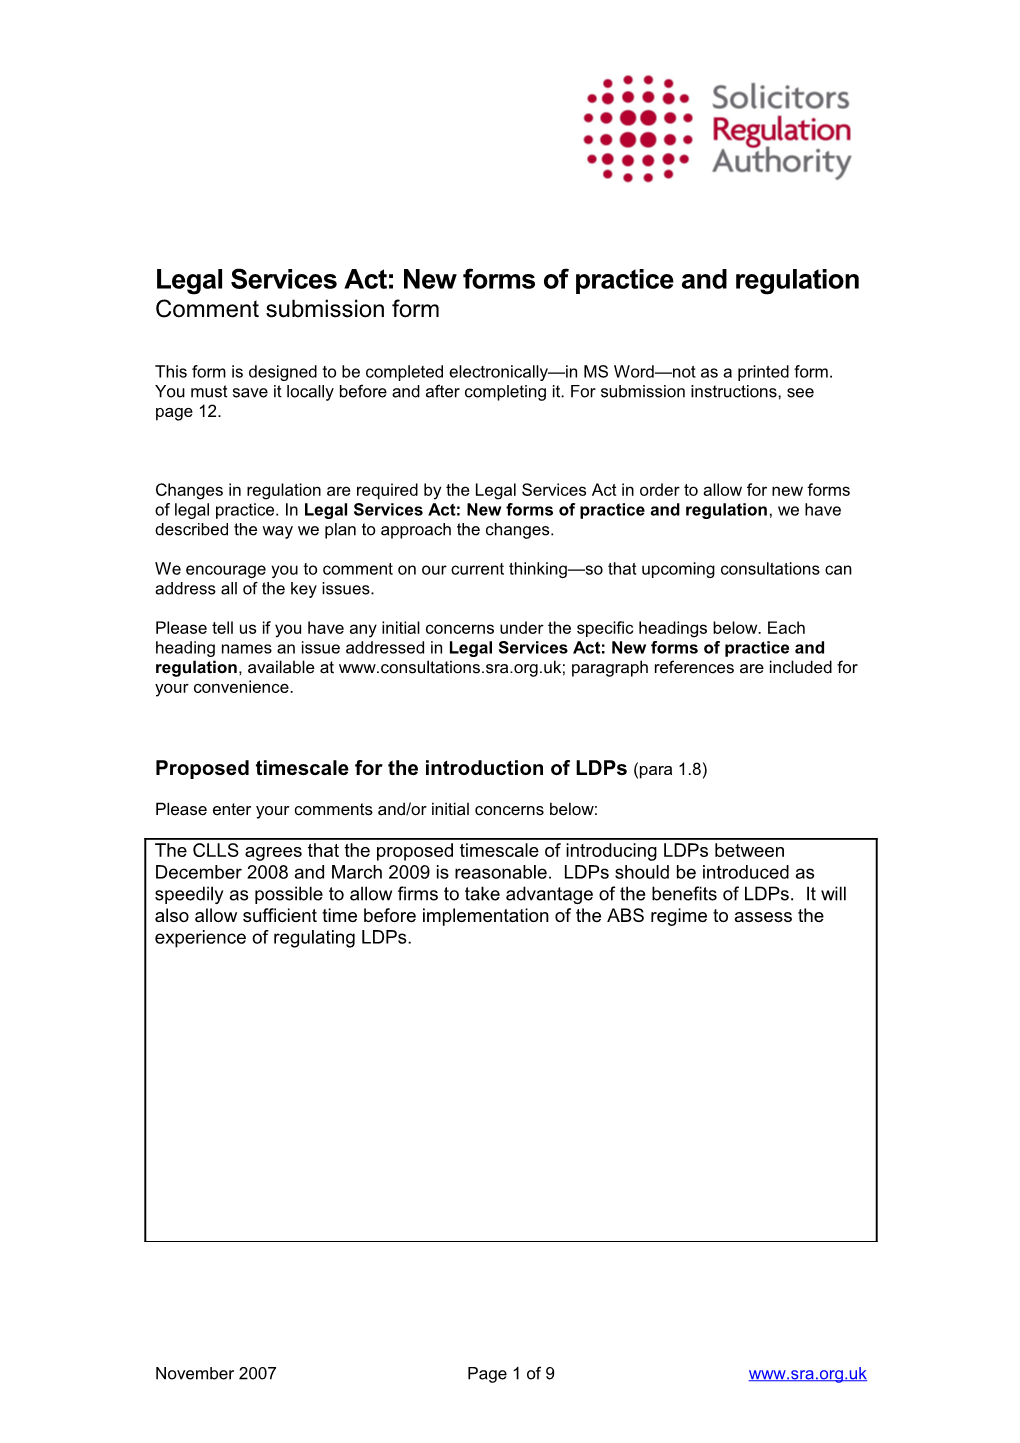 Comment Submission Form: Legal Services Act - New Forms of Practice and Regulation